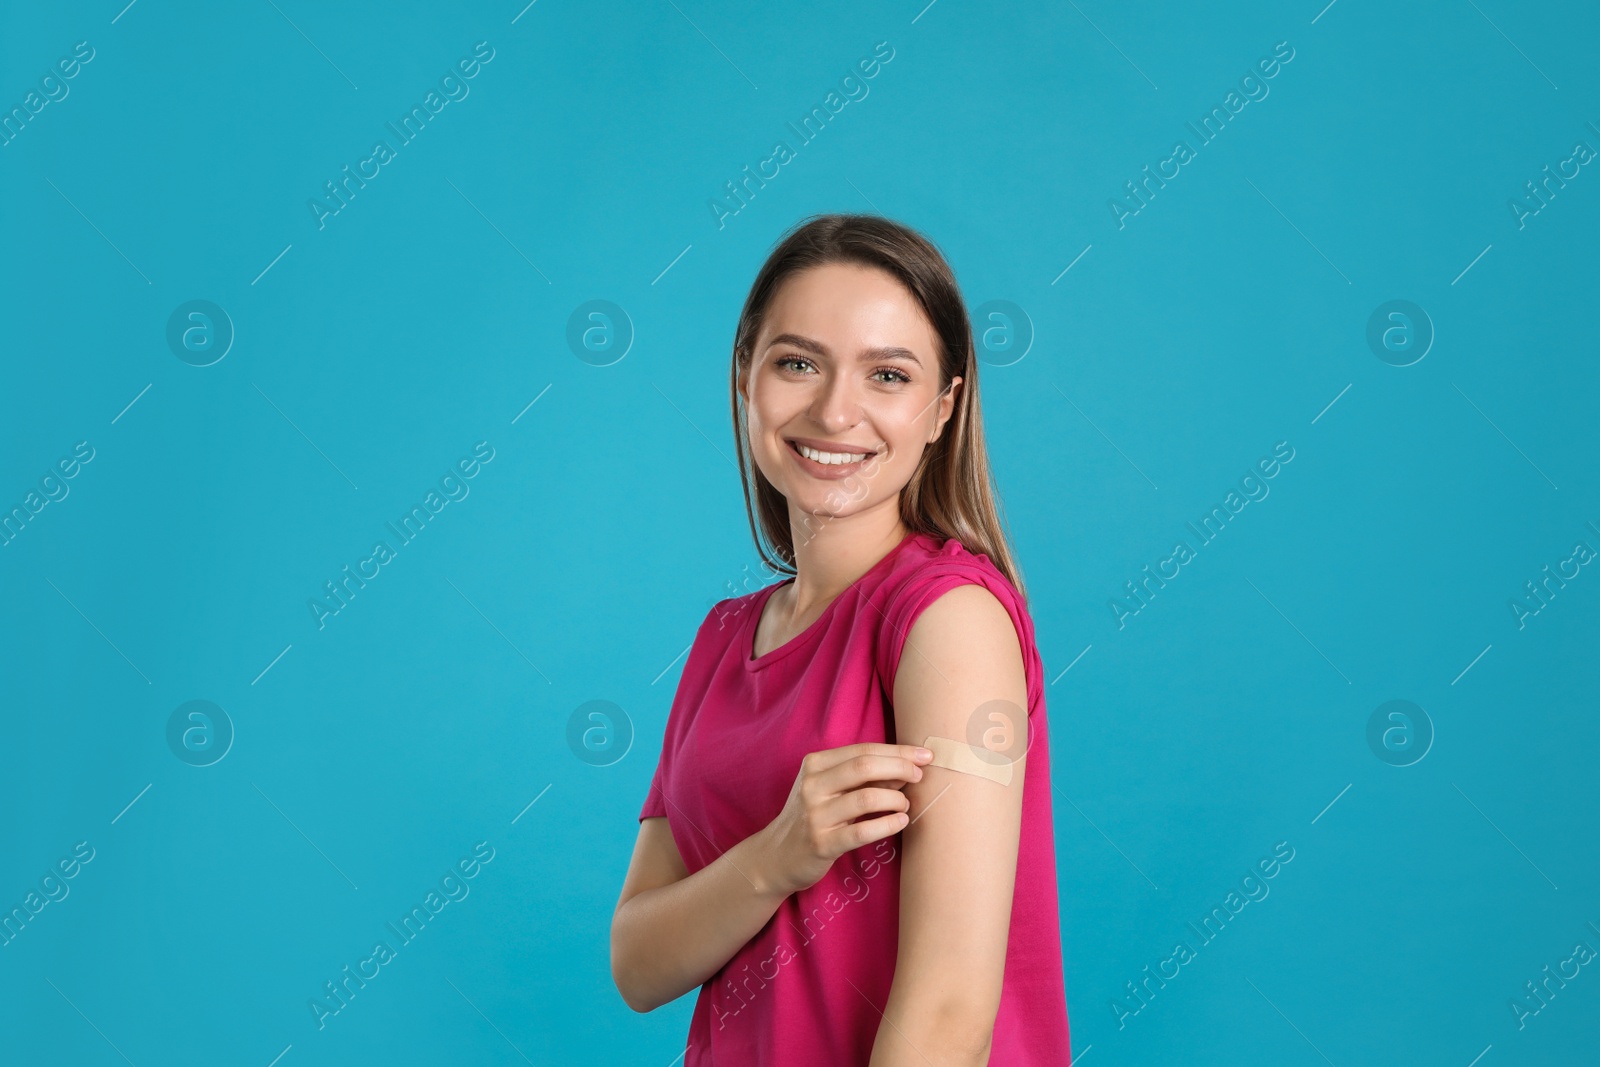 Photo of Vaccinated woman showing medical plaster on her arm against light blue background